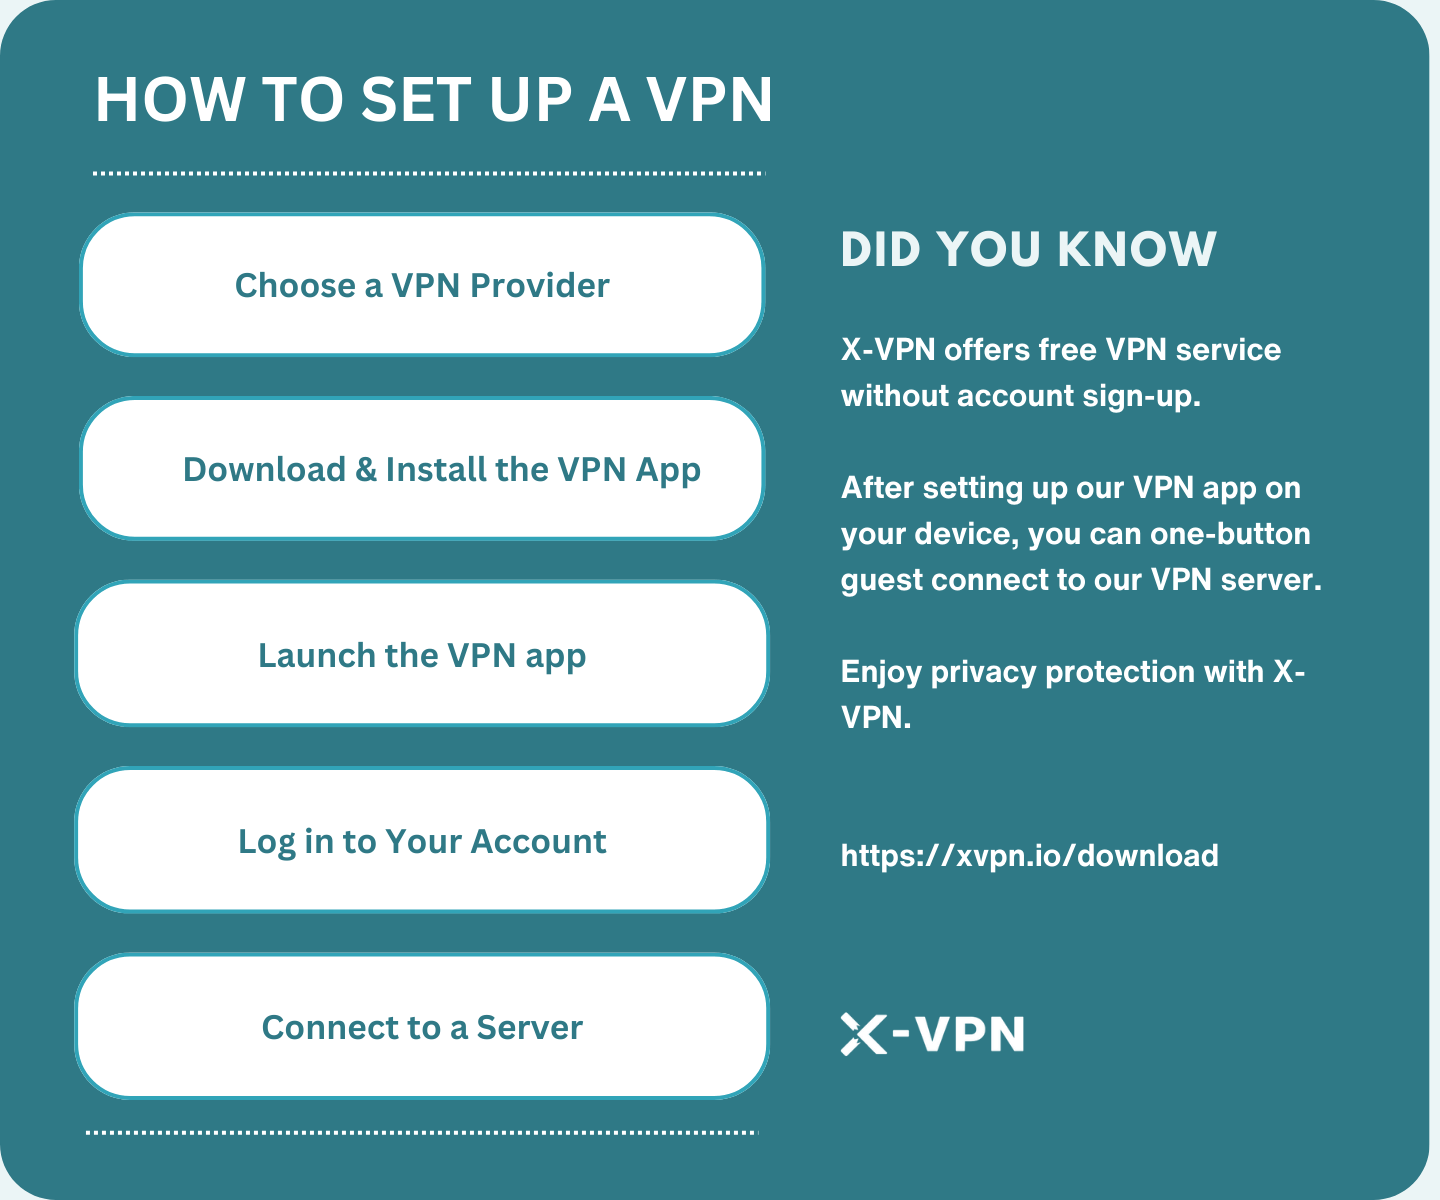 How to Set up a VPN